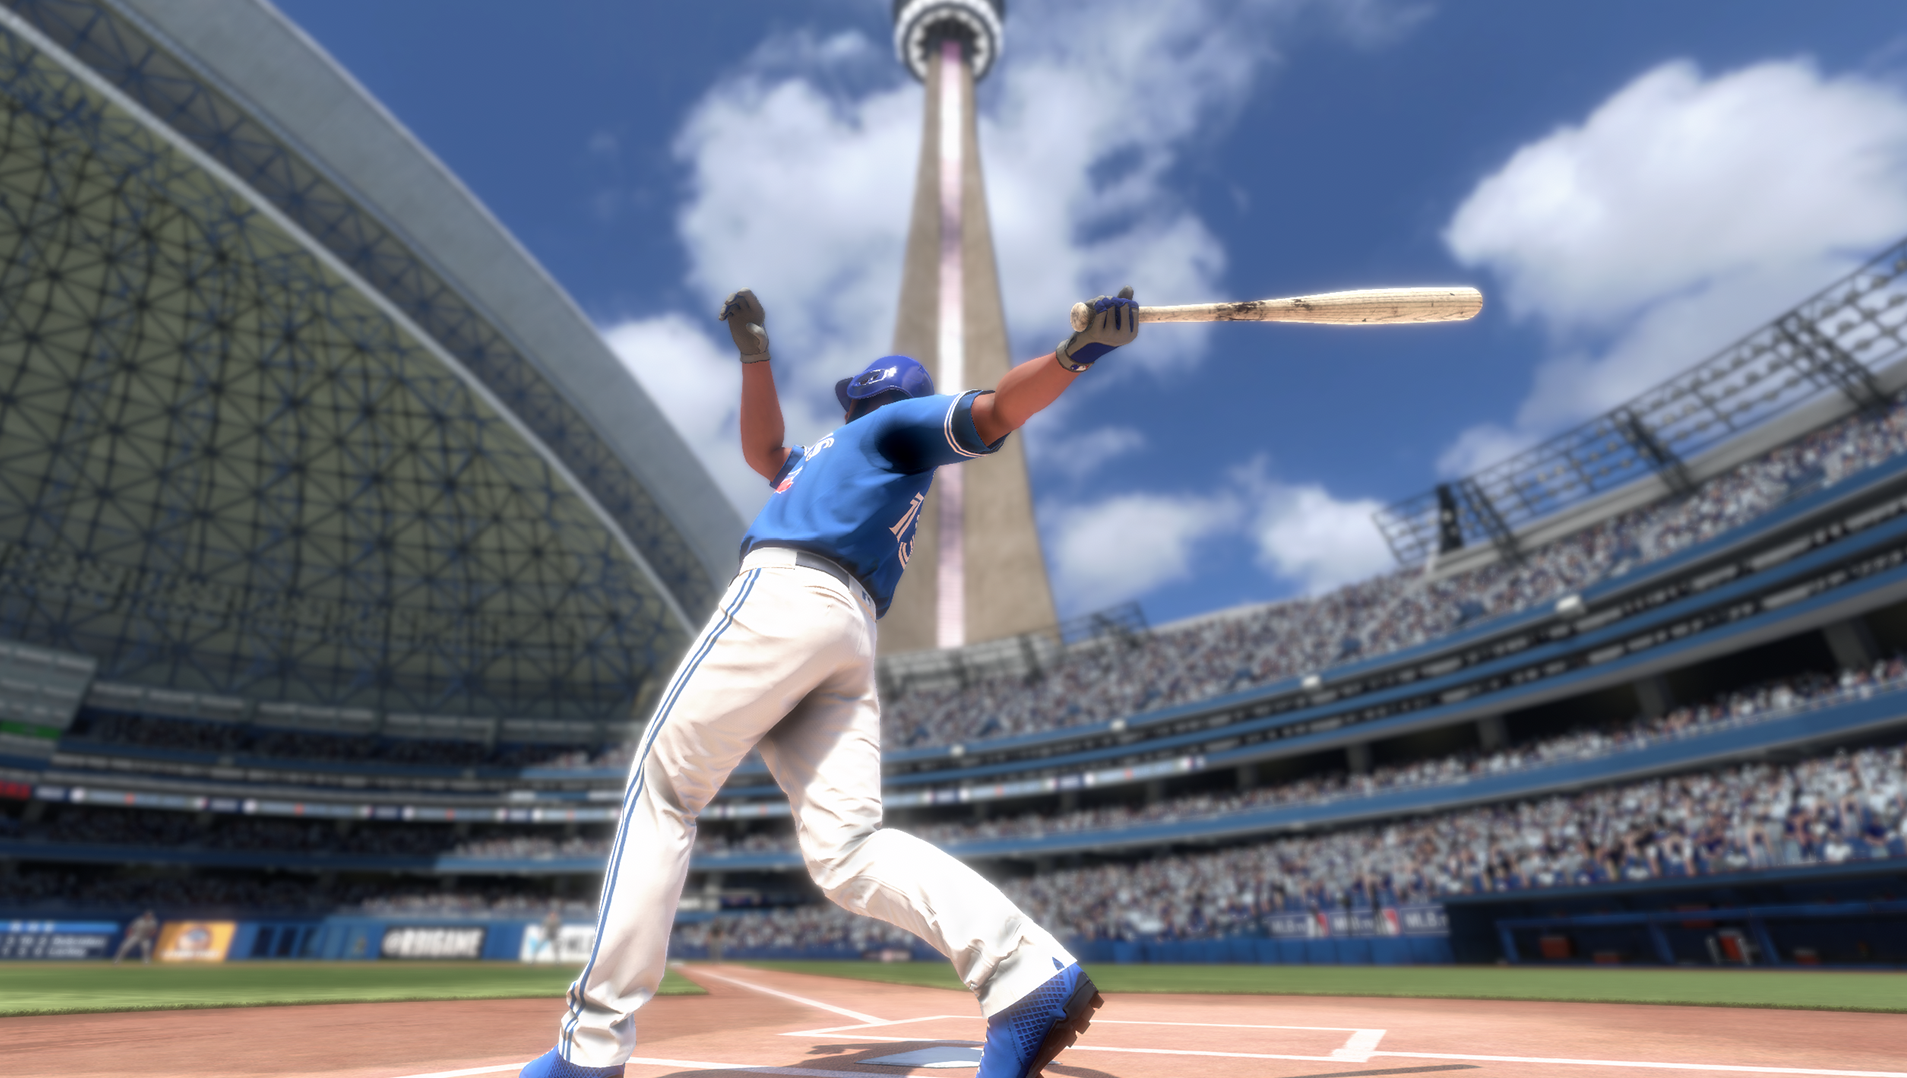 wish I were playing a different game - R.B.I. Baseball 19 review GAMING TREND